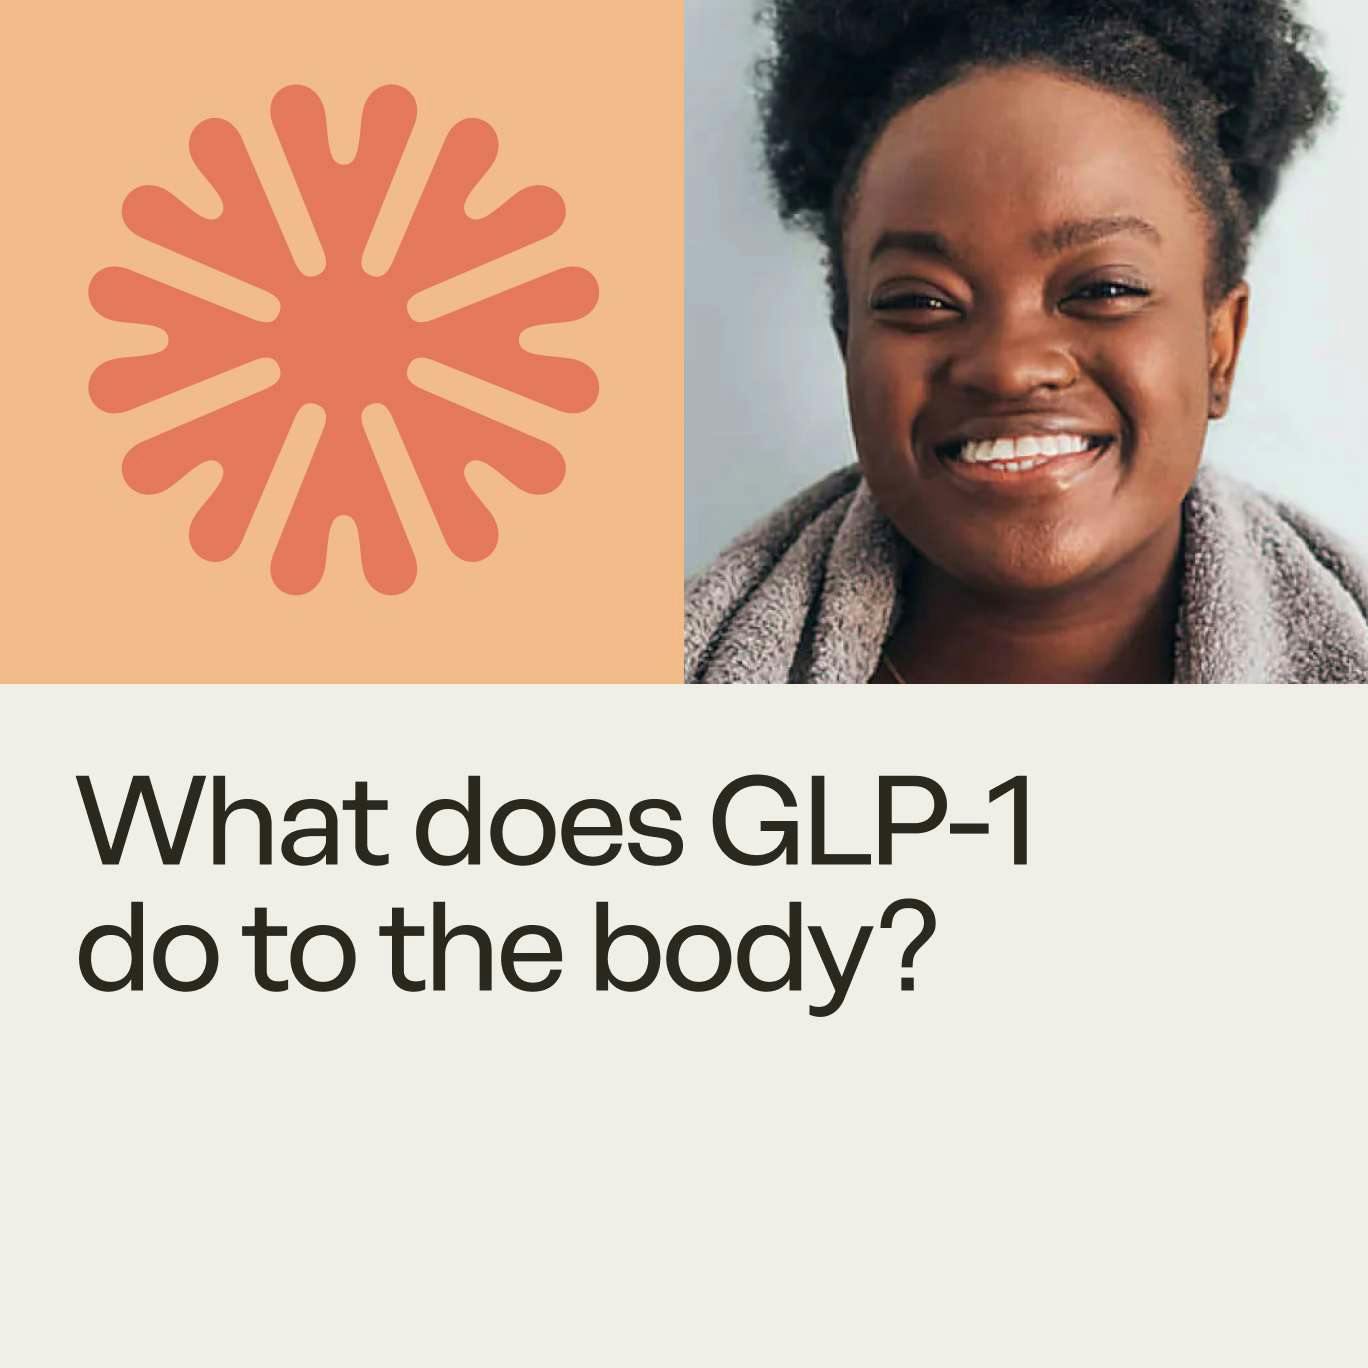 Sunrise layout - what does GLP-1 do to the body?